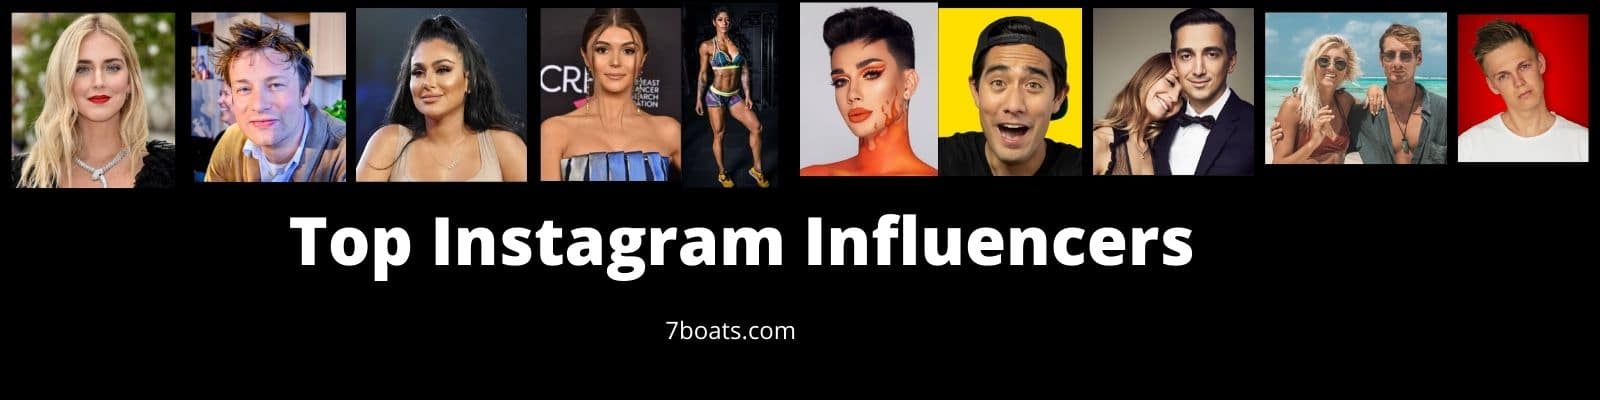 Top 10 Instagram influencers you should follow